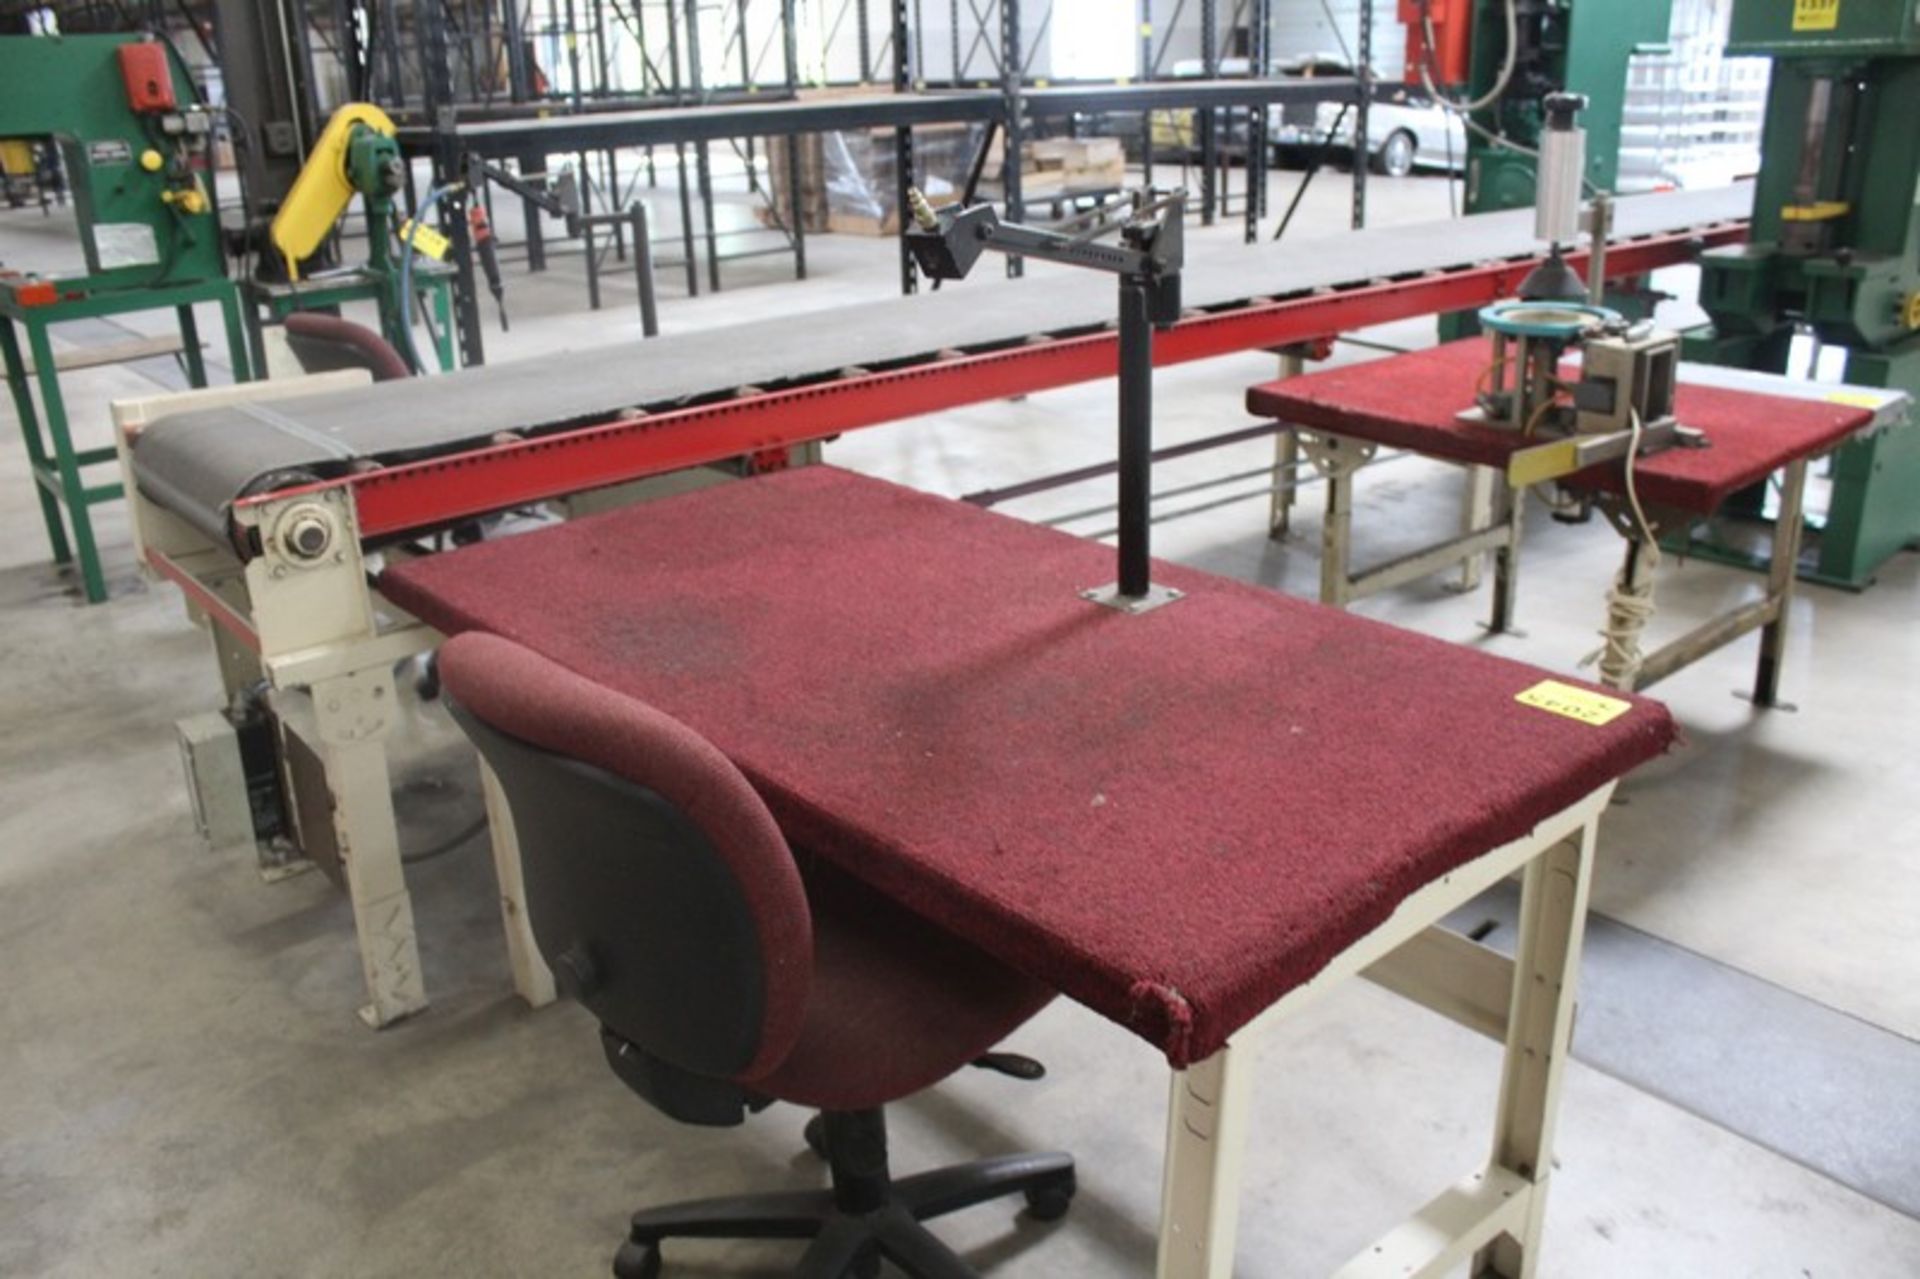 STEEL FRAME WORKBENCH, 60" X 32" X 31" WITH ARTICULATING ARM